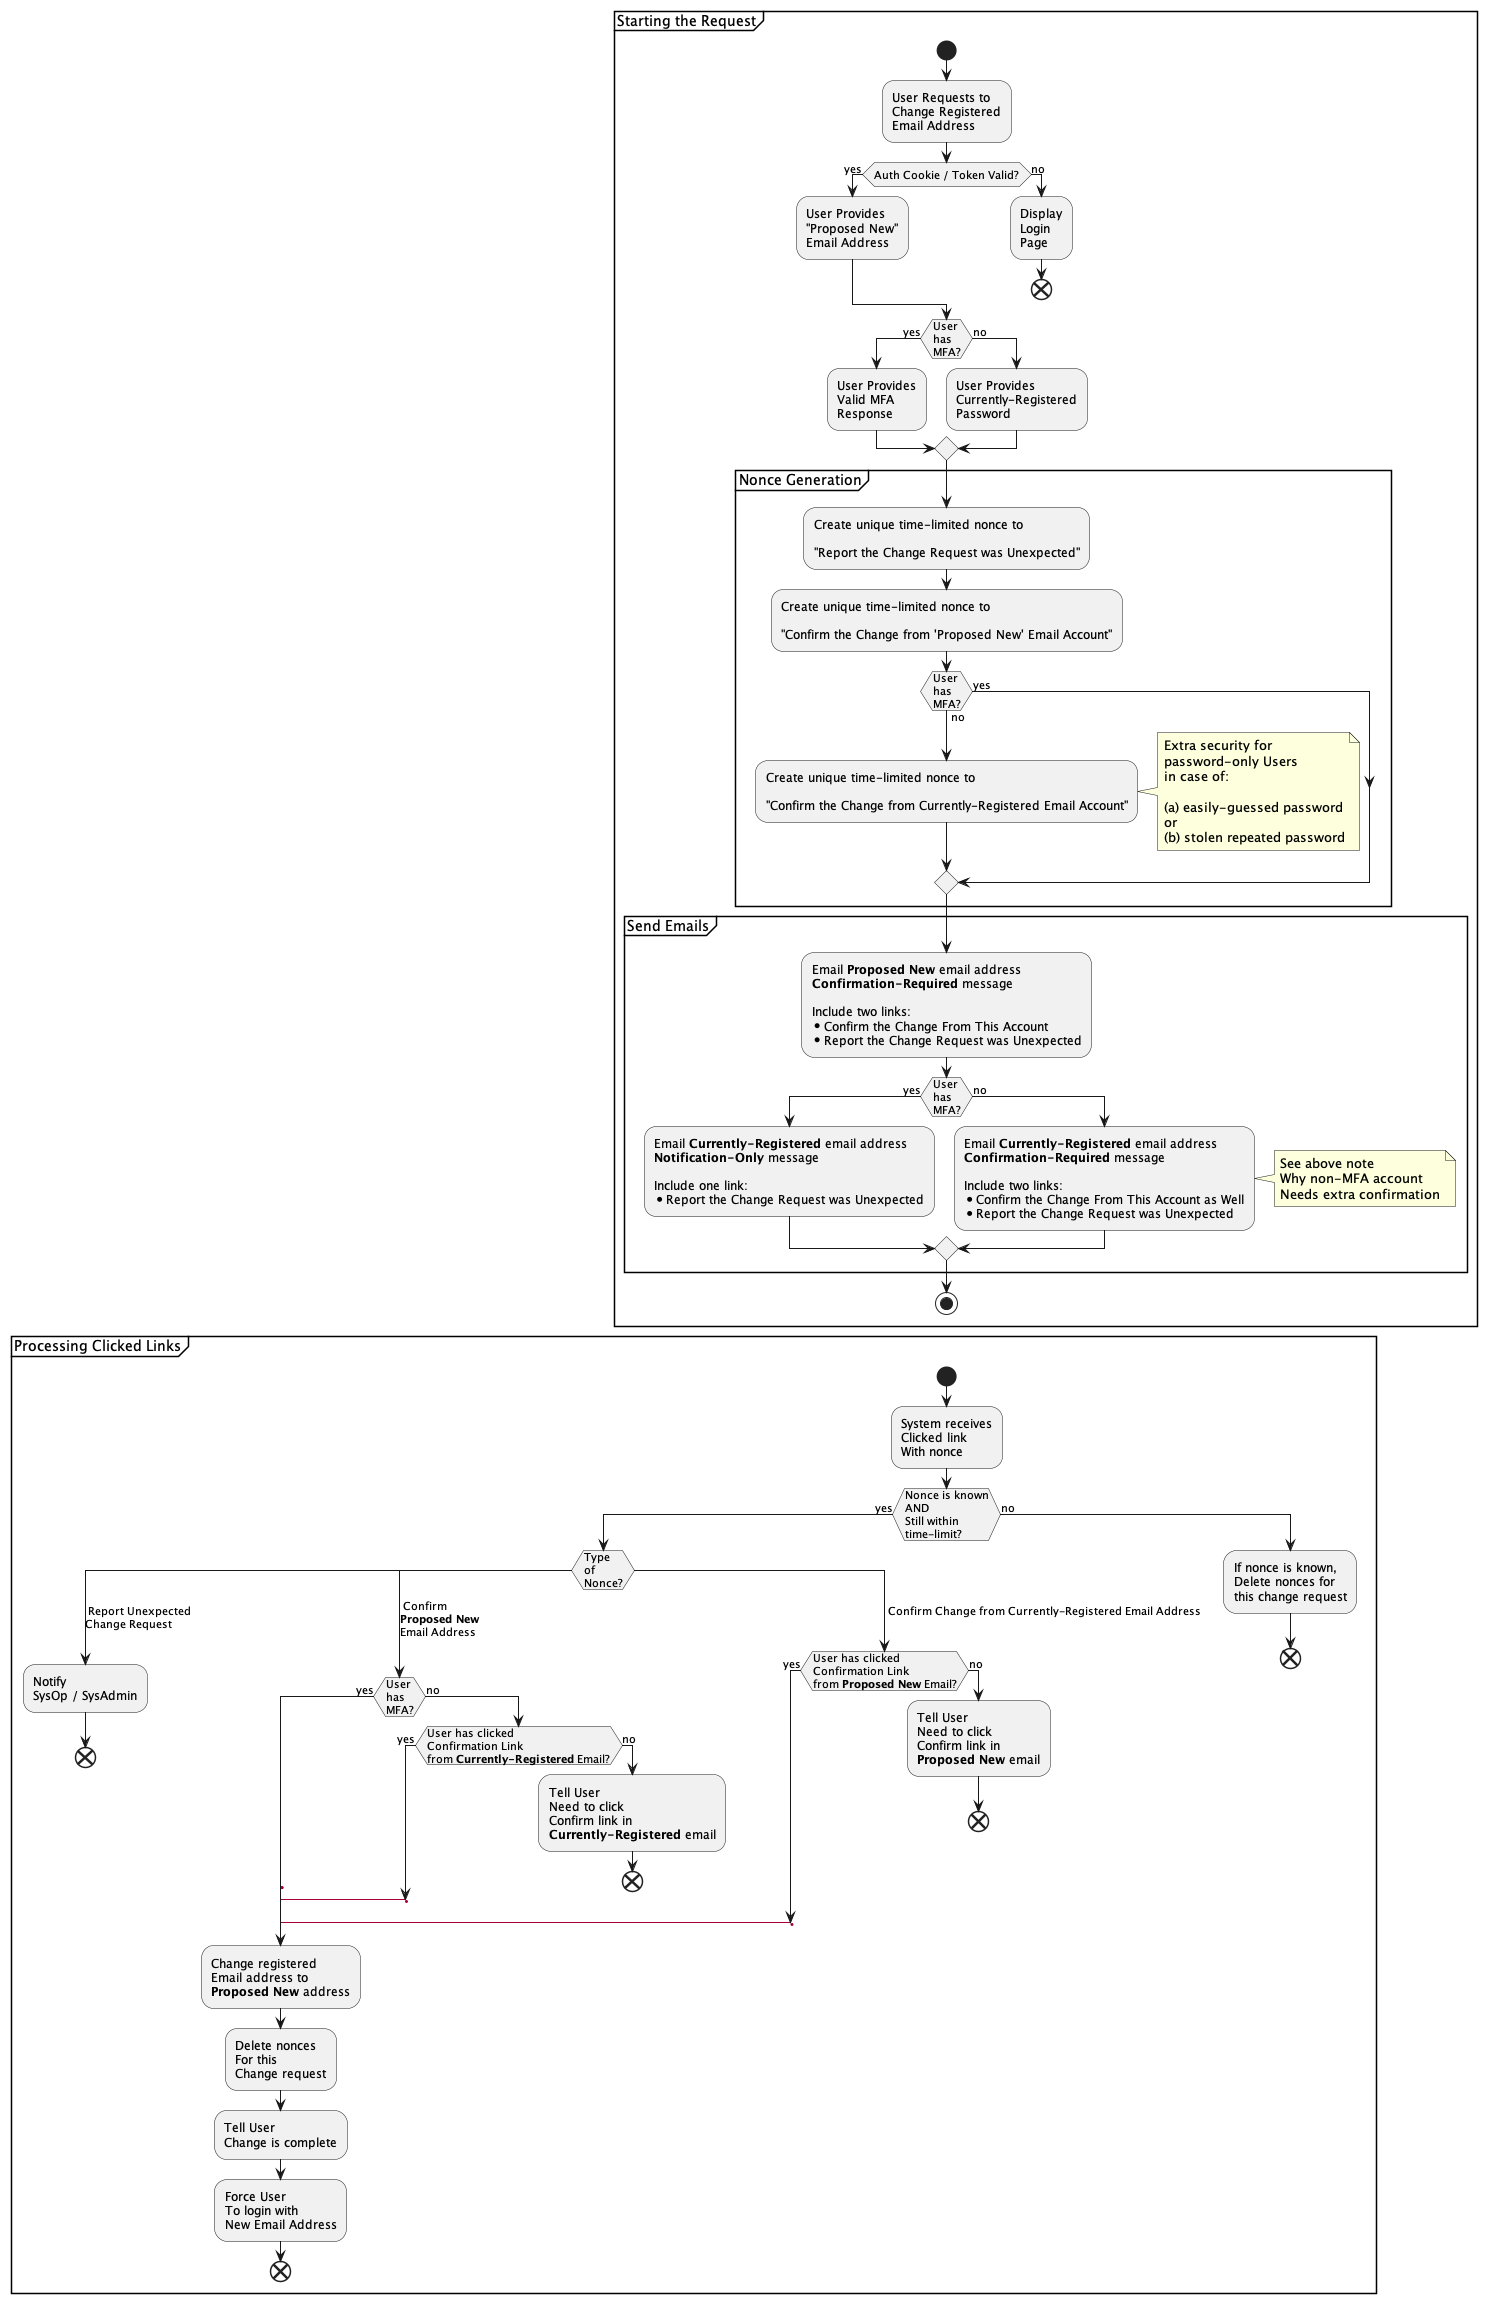 Image:Changing_Registered_Email_Address_In_A_System_Flowchart.png